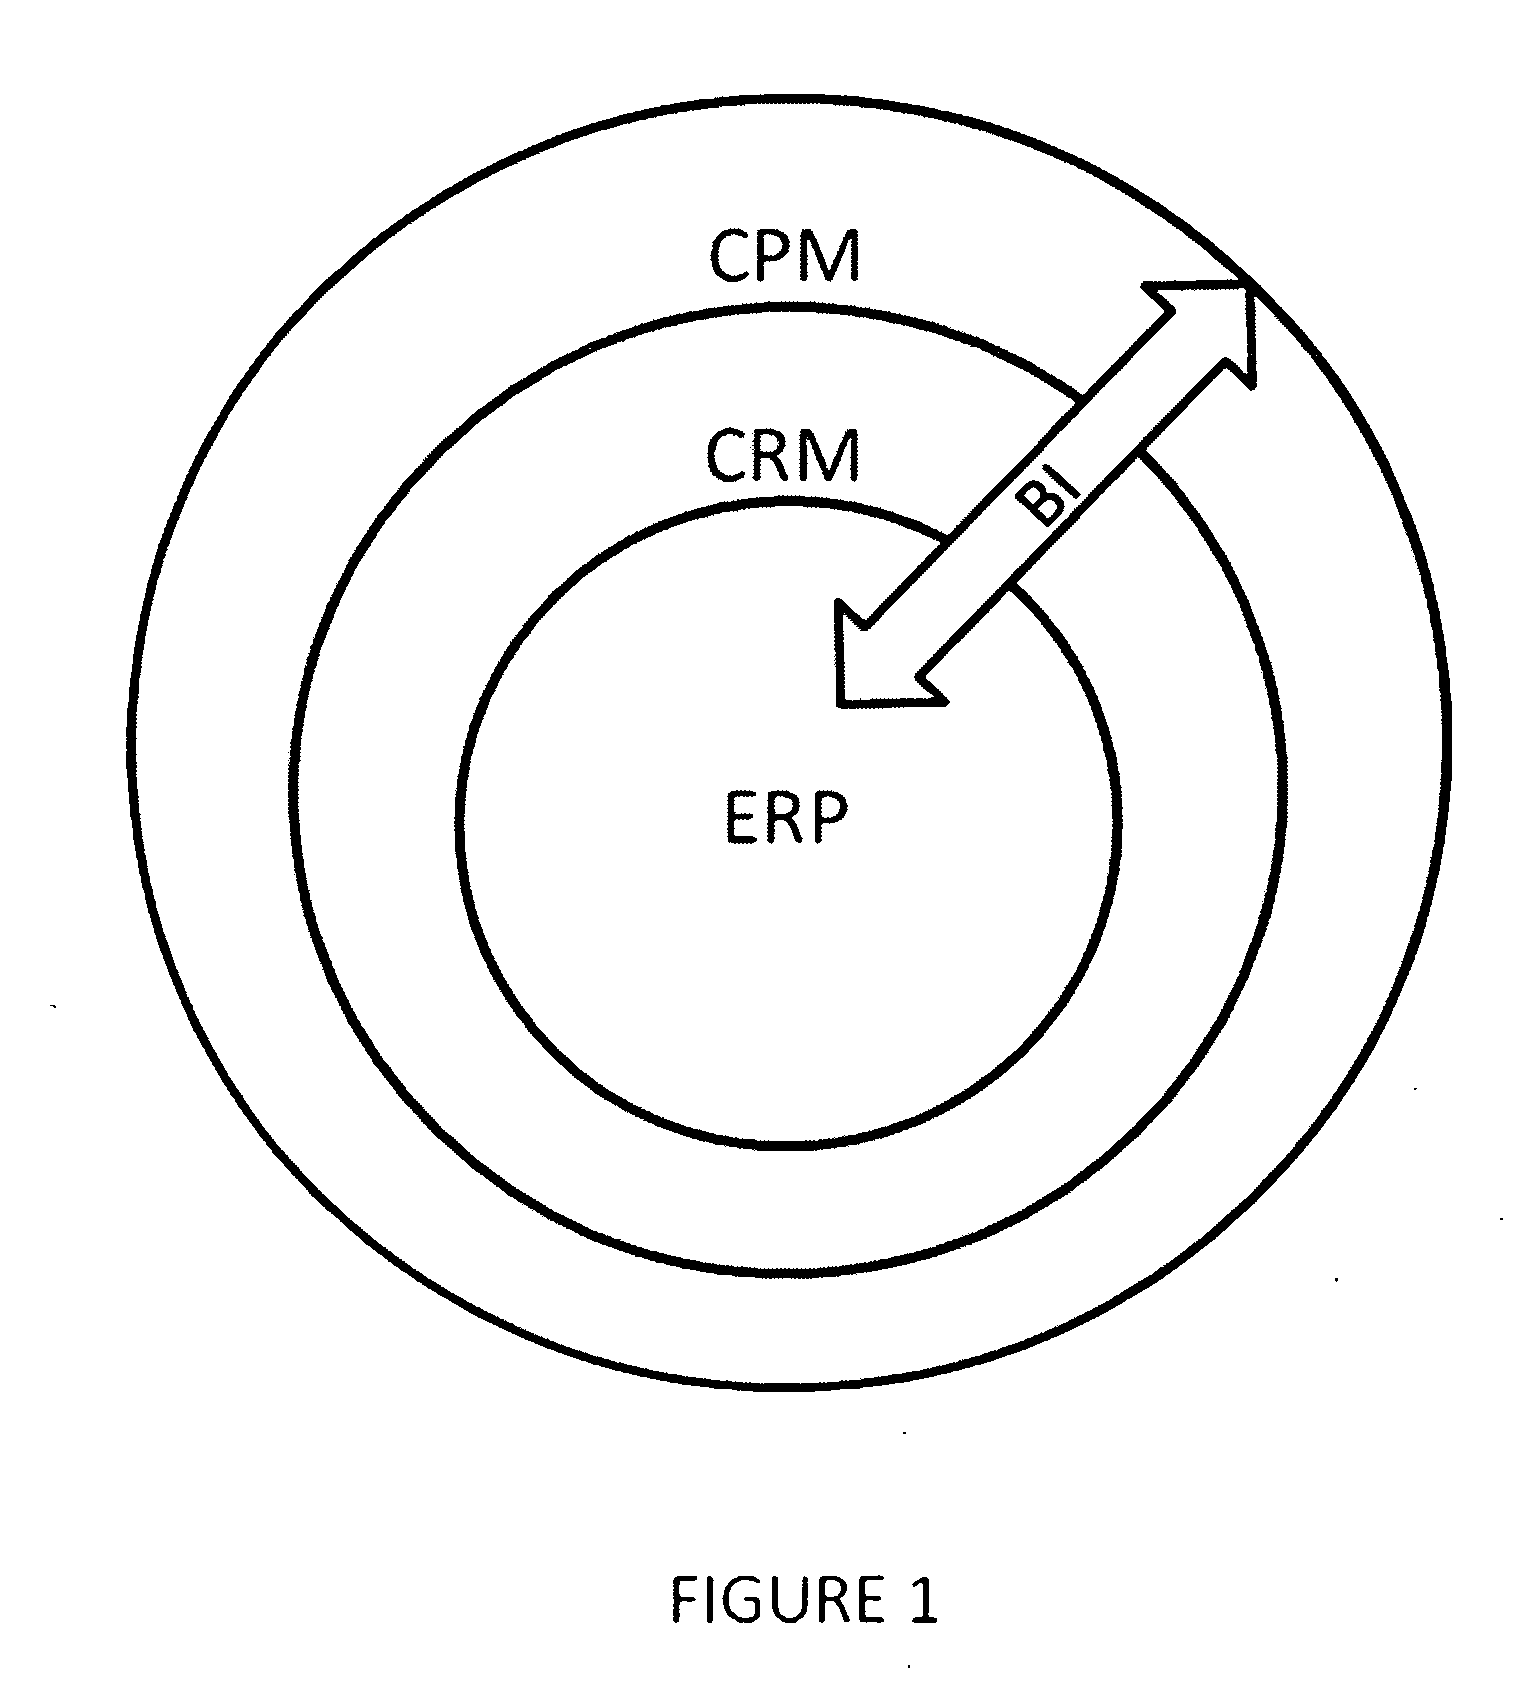 System and method for creating and managing intelligence events for organizations